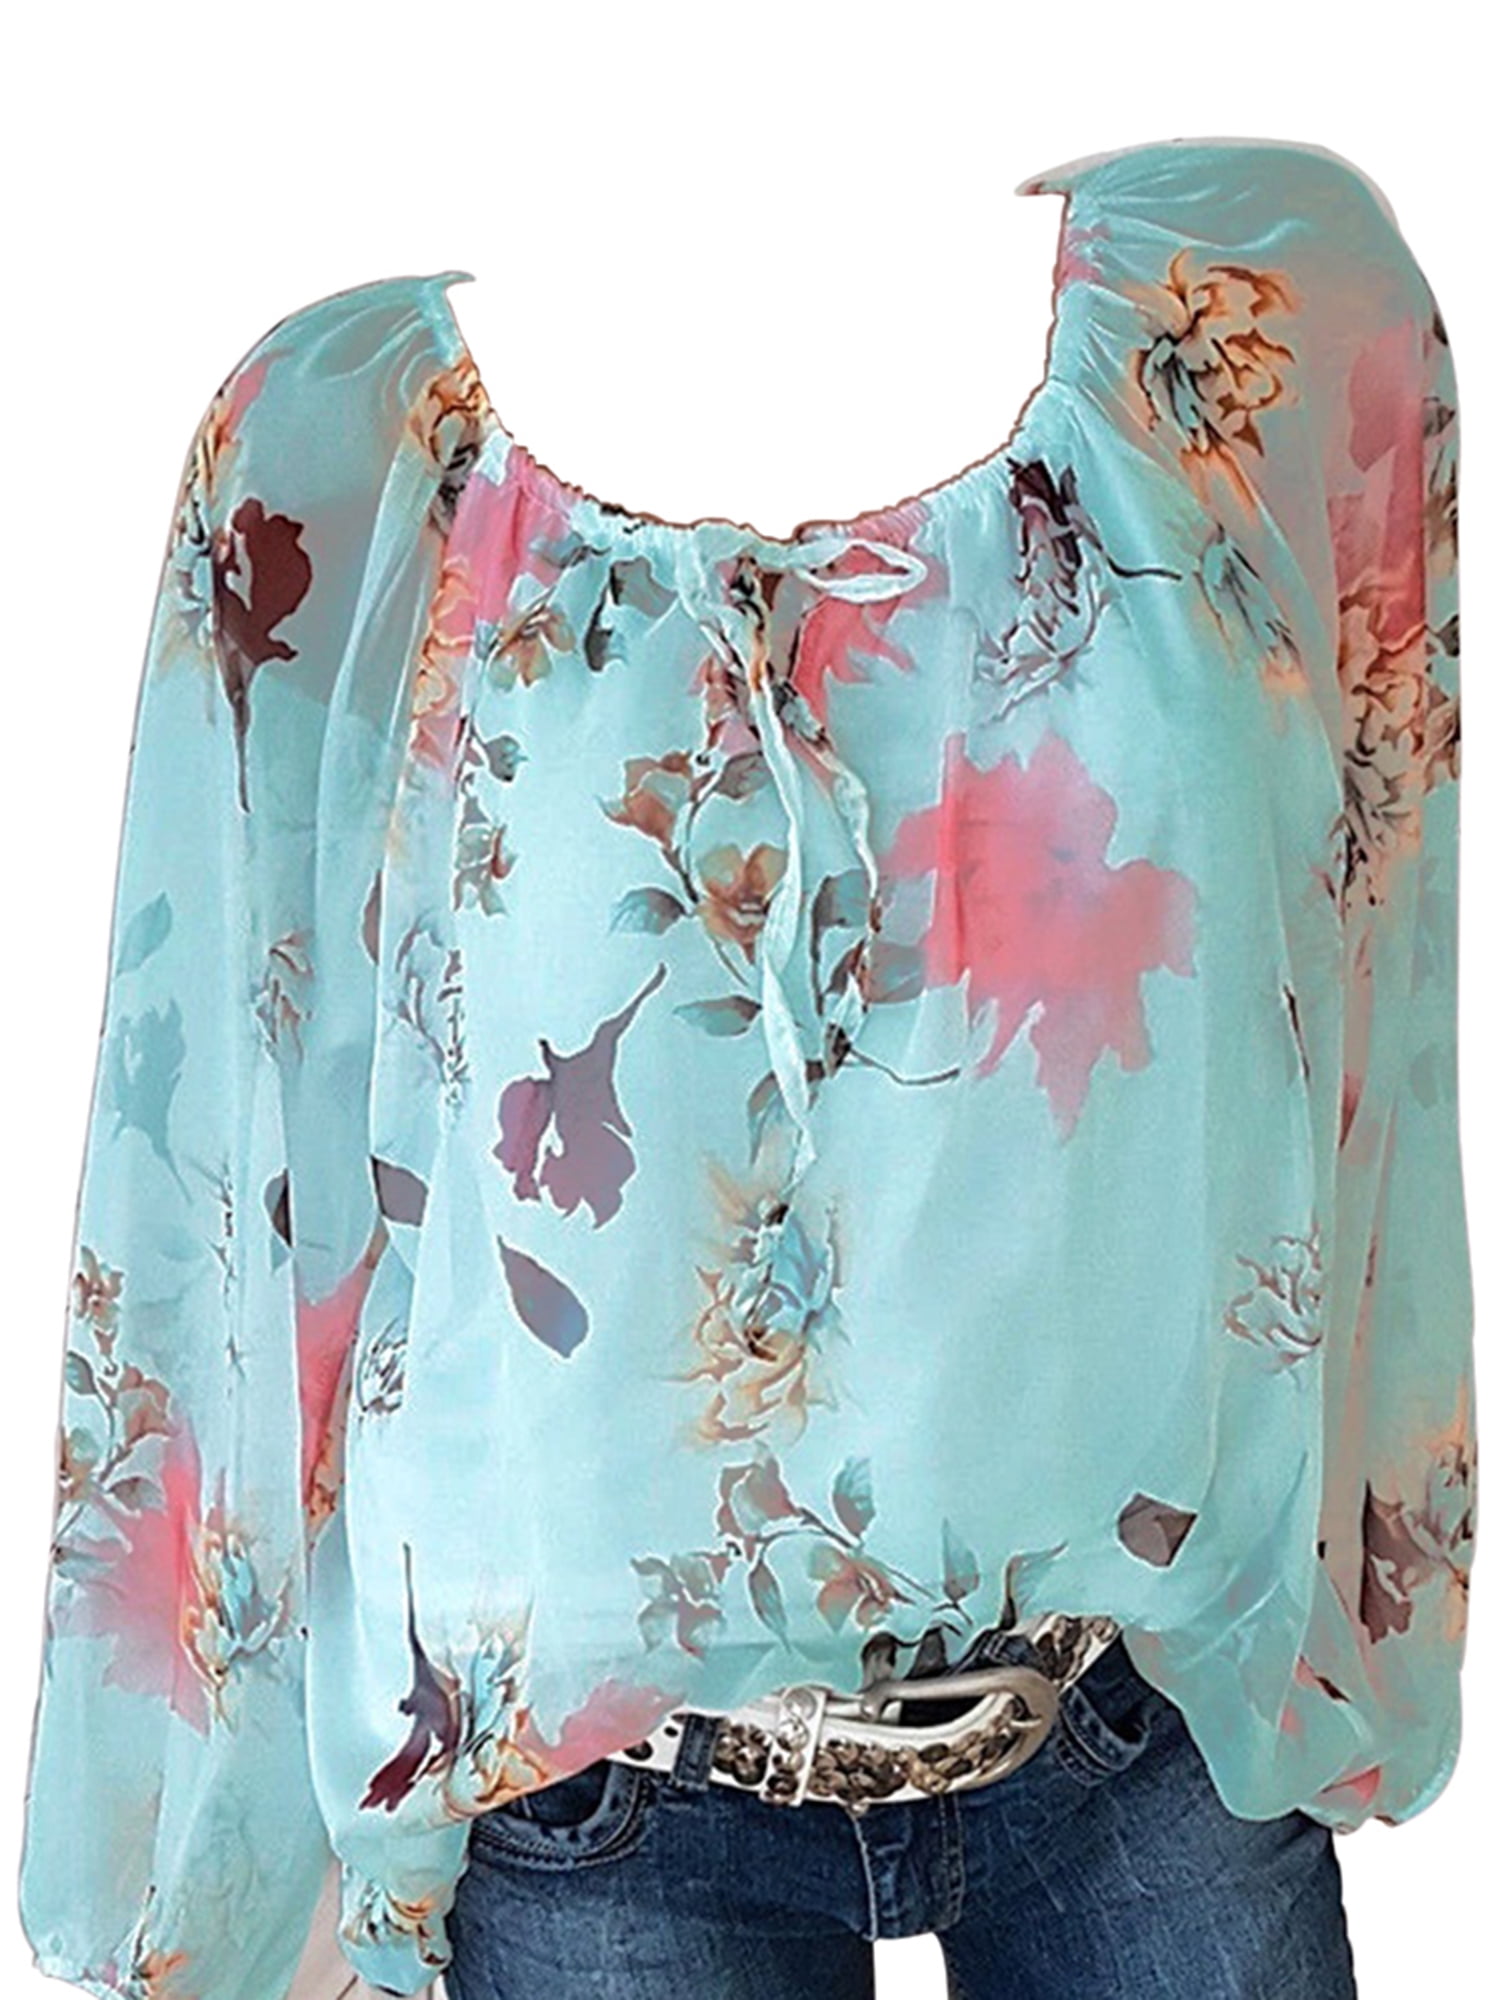 Aukbays Womens Oversized Floral Blouse Off Shoulder Lantern Sleeves Chiffon Flowy Tops T-Shirts Shirts Tees Blouses 